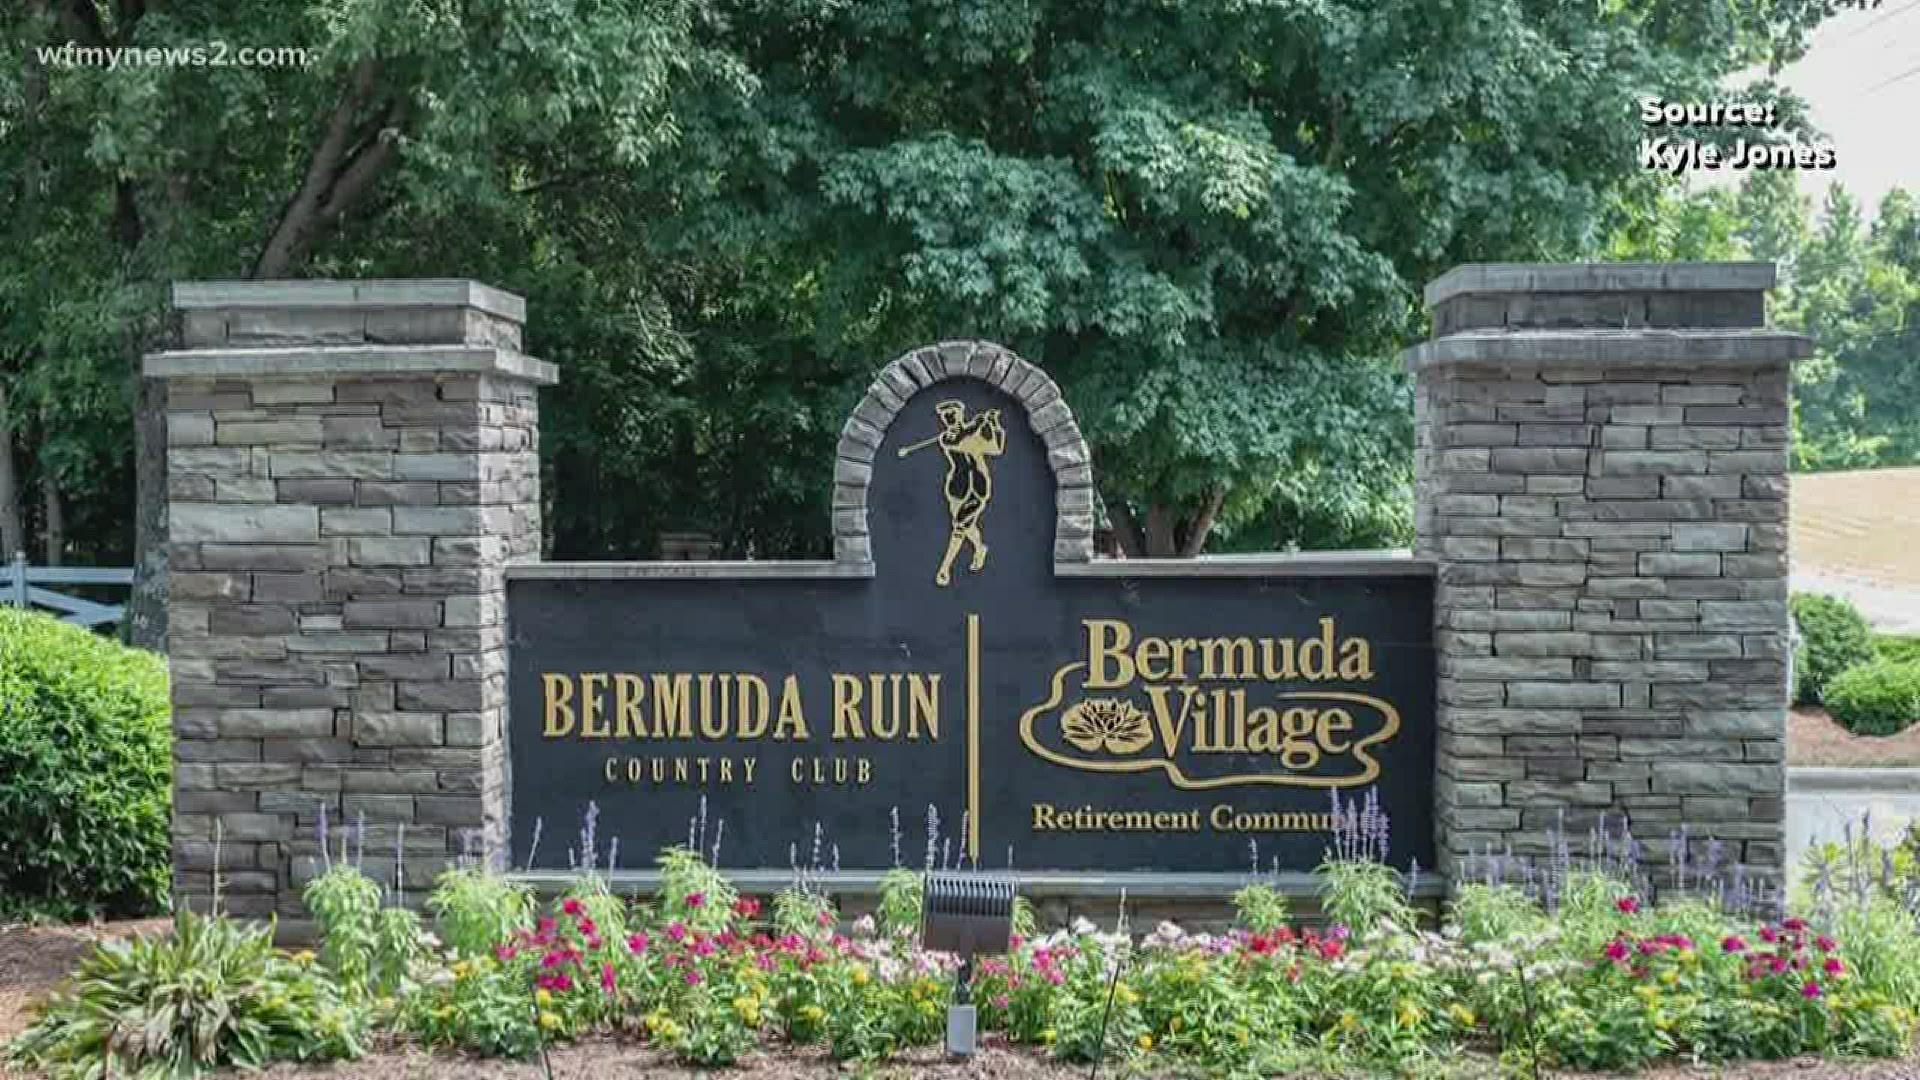 Bermuda Village is taking strict steps to keep its residents safe. 80-year-old Carol Quinn says they couldn't be in better care.